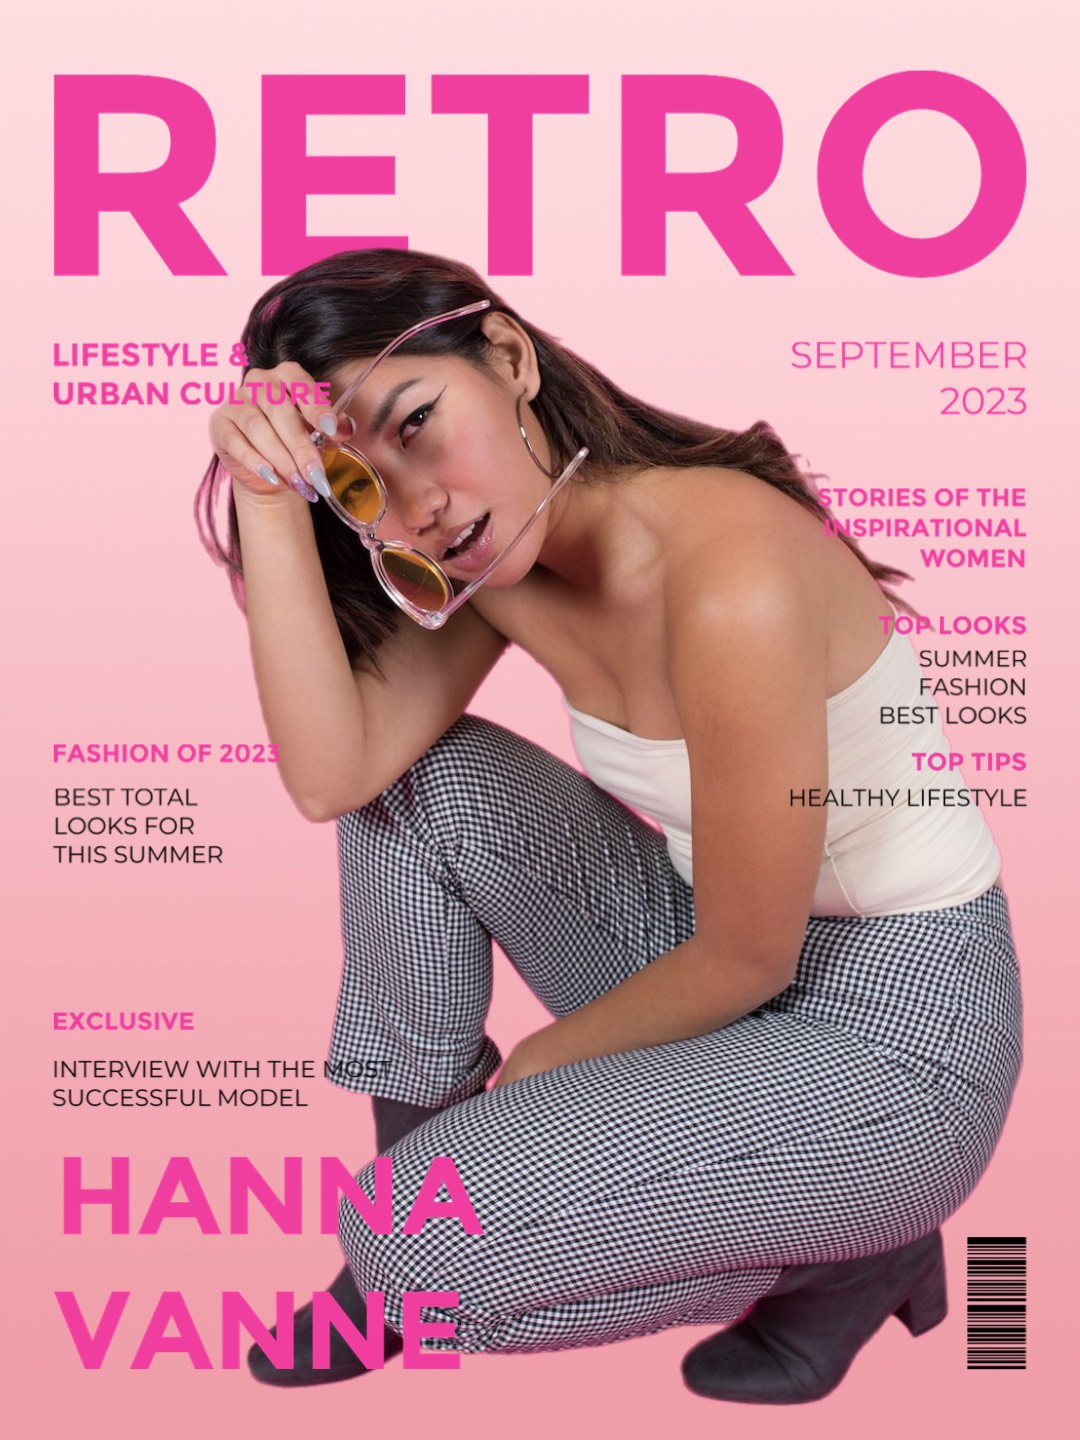 cute pinky fashion and lifestyle magazine cover 